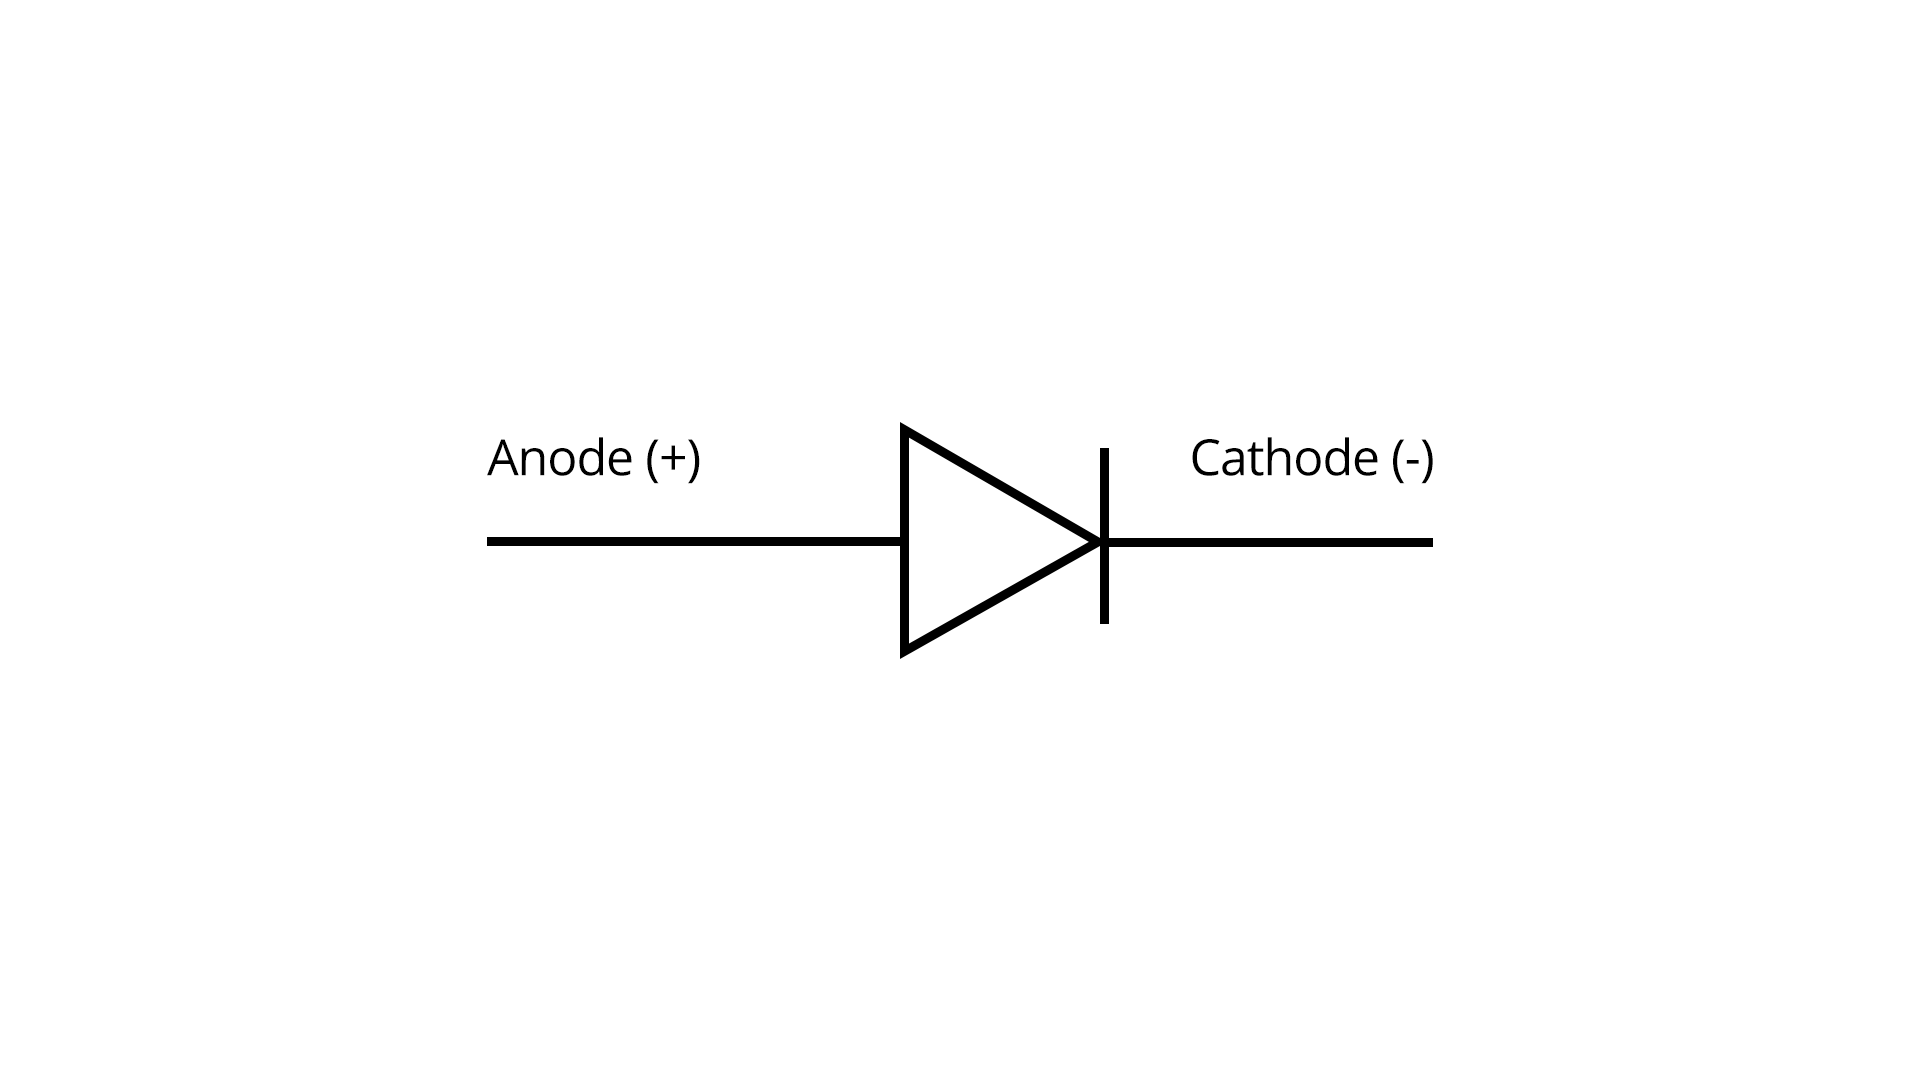 The symbol of the PN-Junction diode